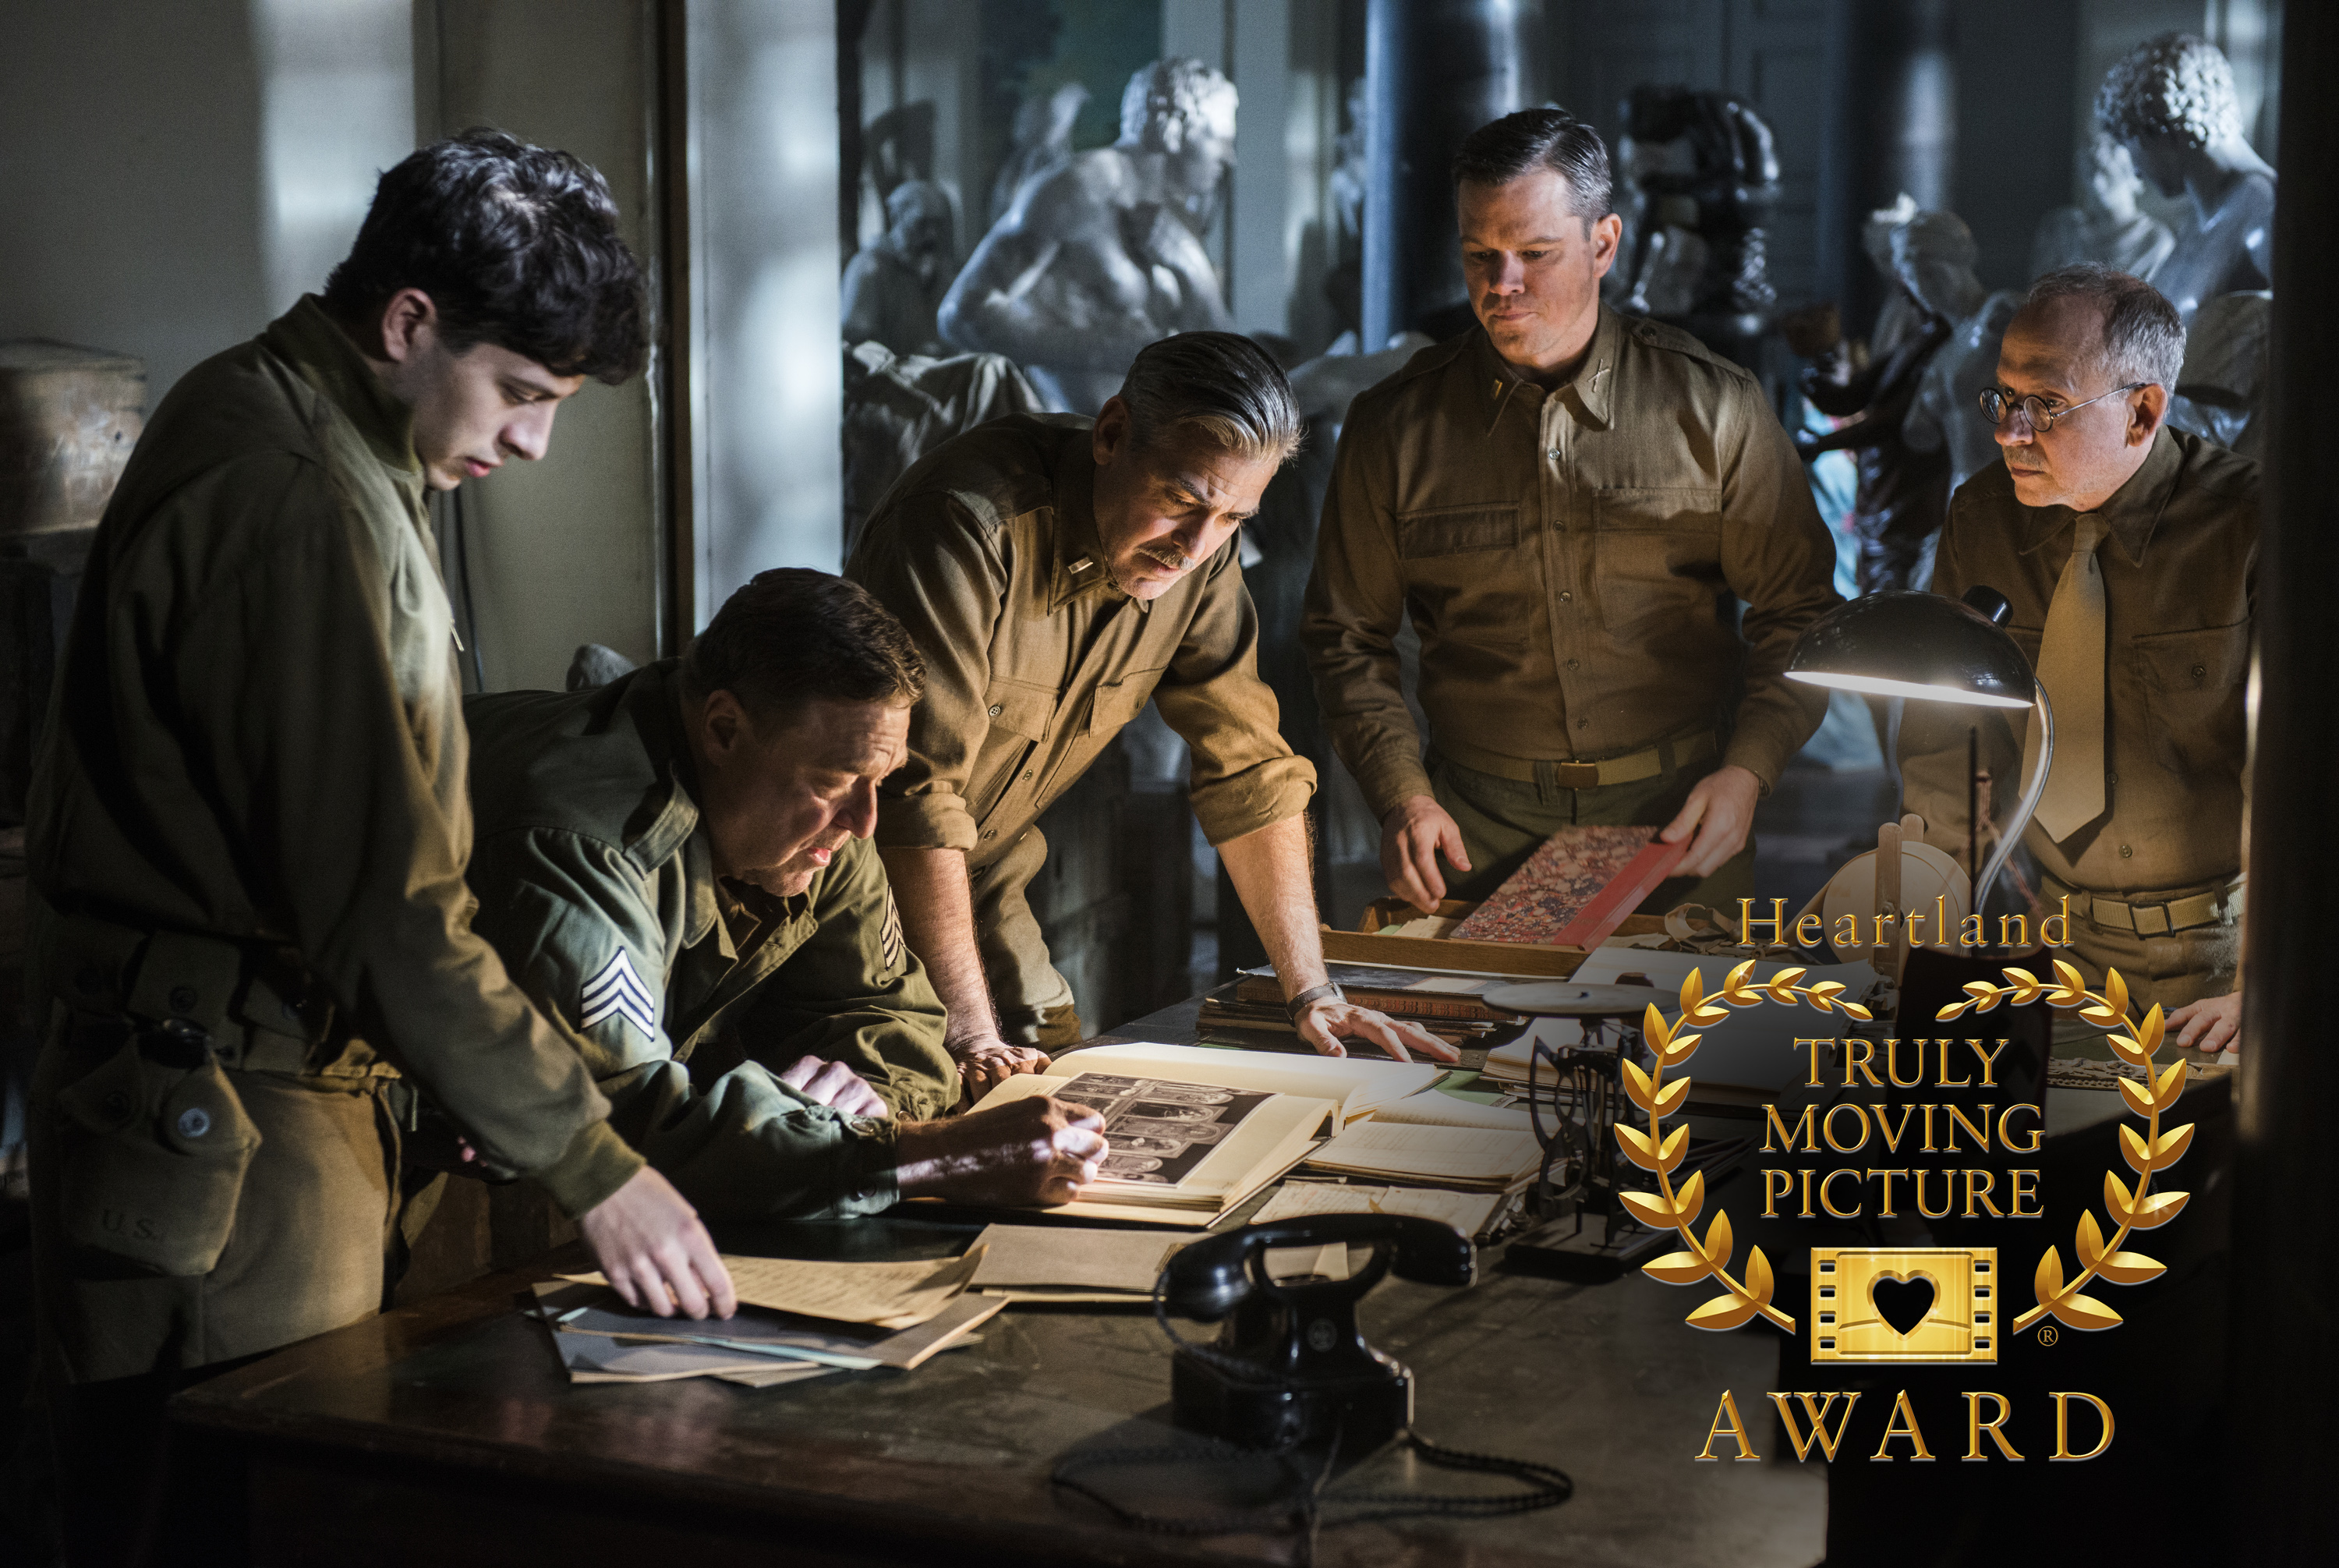 "The Monuments Men" honored with Truly Moving Picture Award.